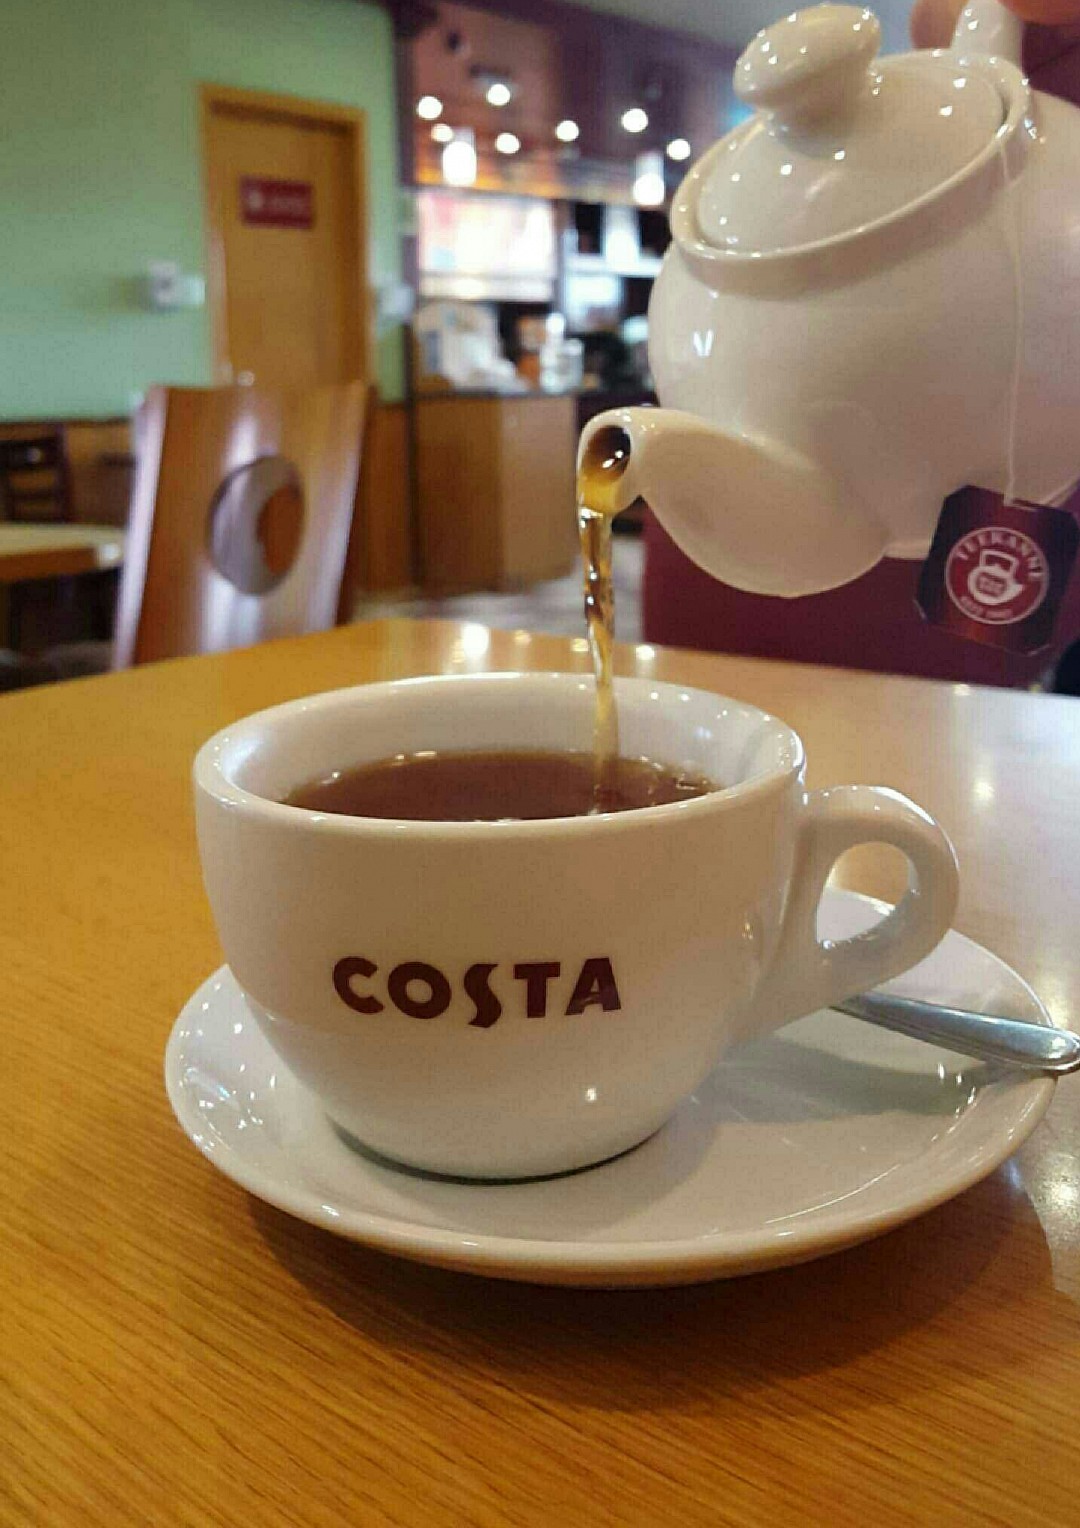 First I drink the tea👌Then I do the things👍 @ Costa Coffee - Bahrain